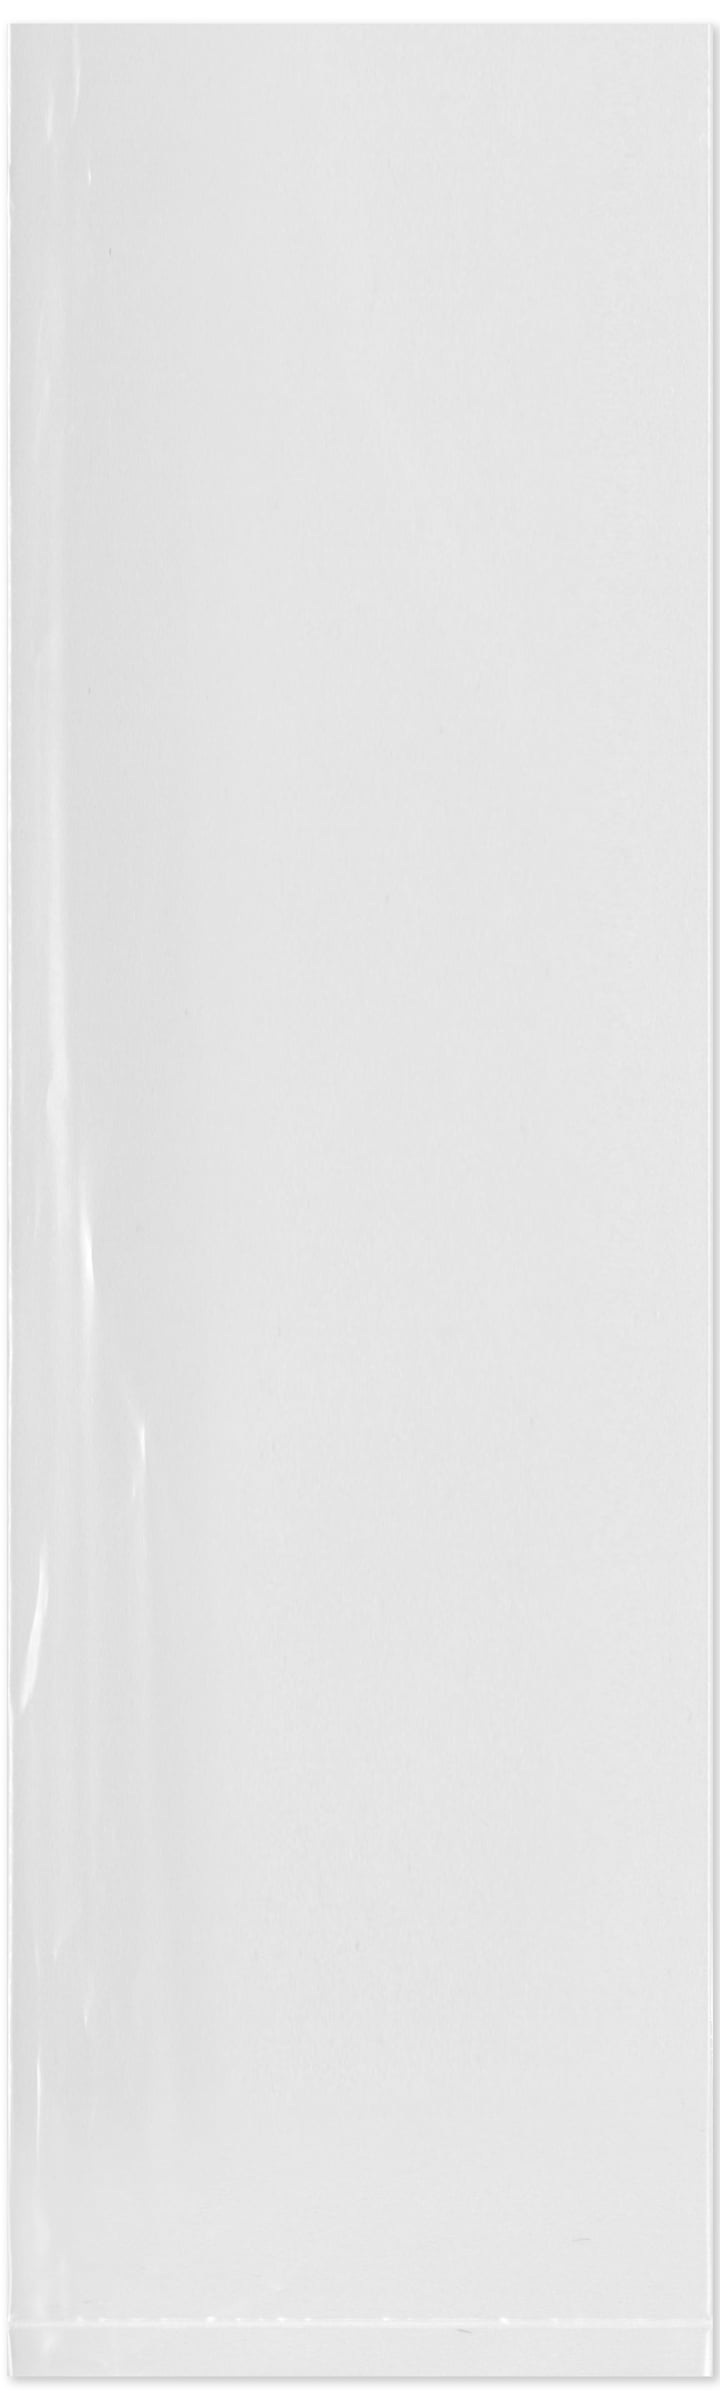 Flat Open Clear Plastic Poly Bags 2 Mil pack of 100      14x20 in 14" x 20" 